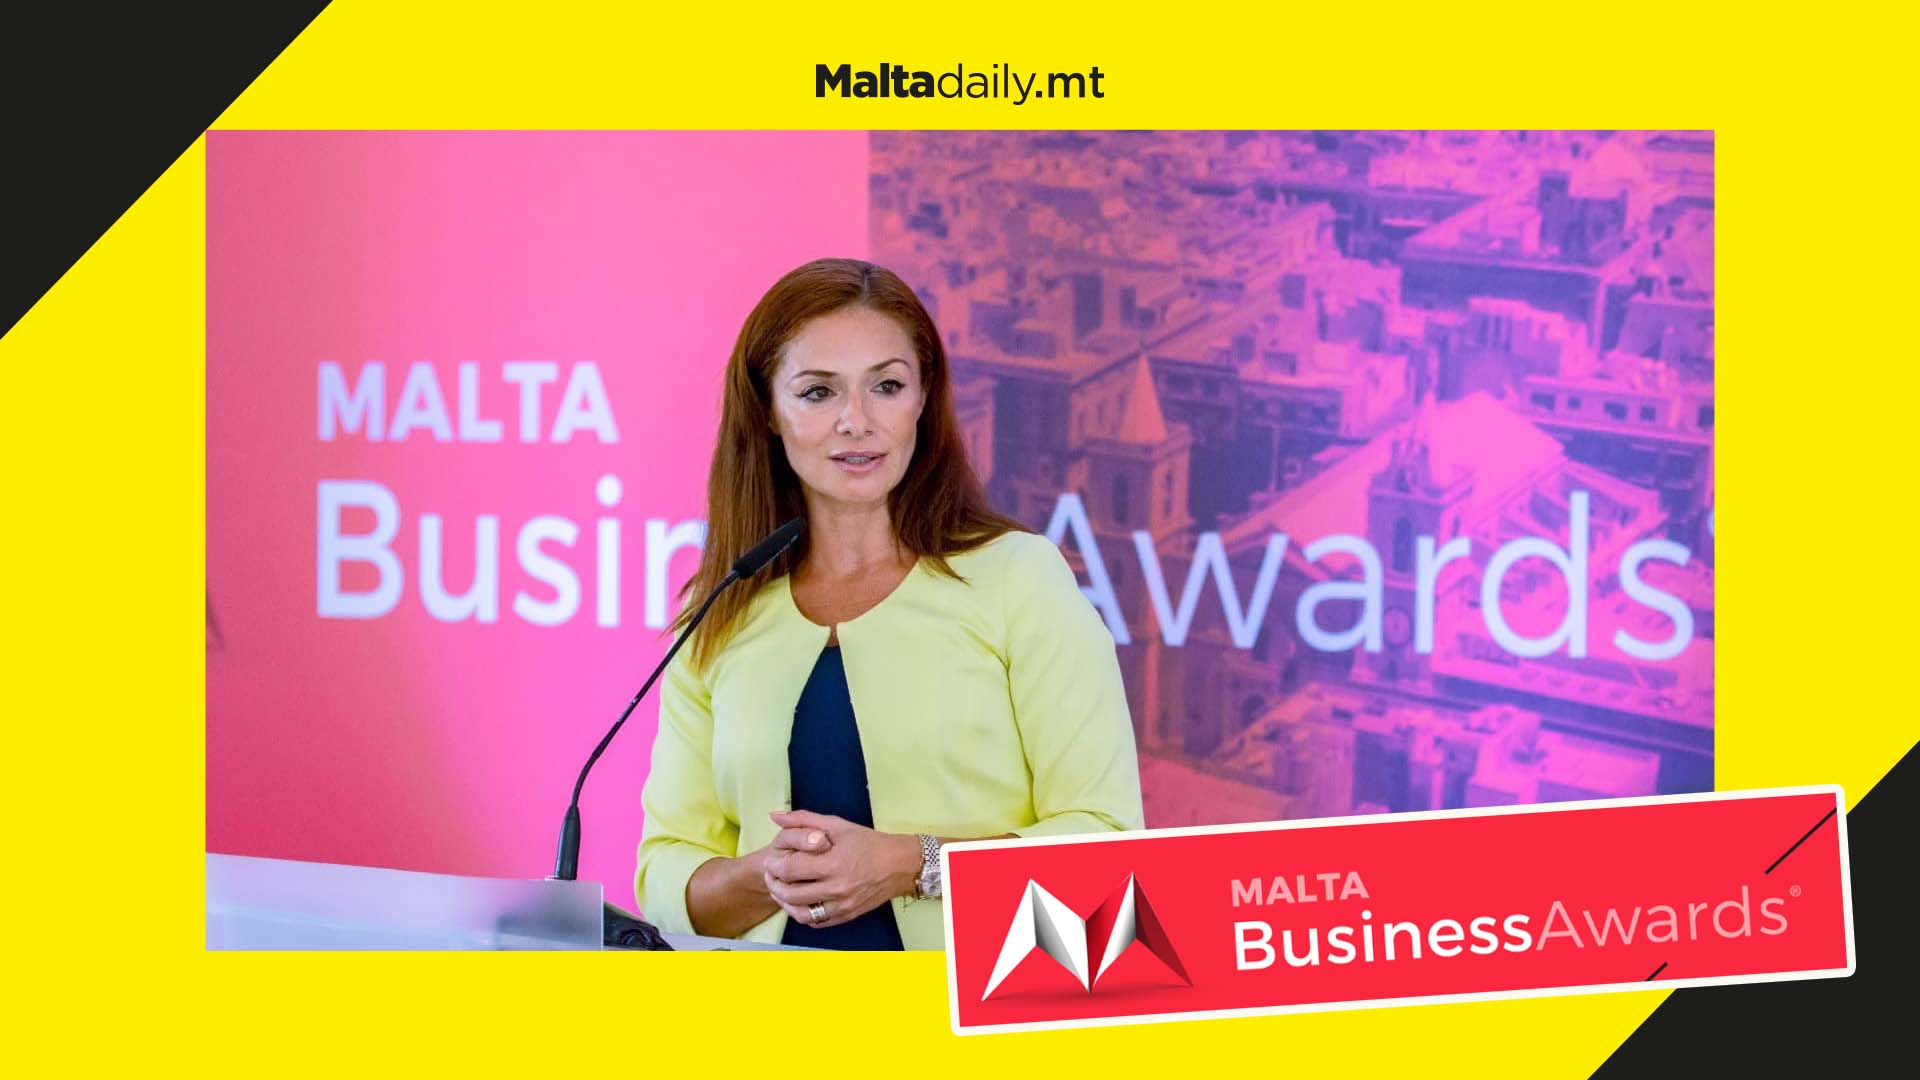 First edition of Malta Business Awards officially announced